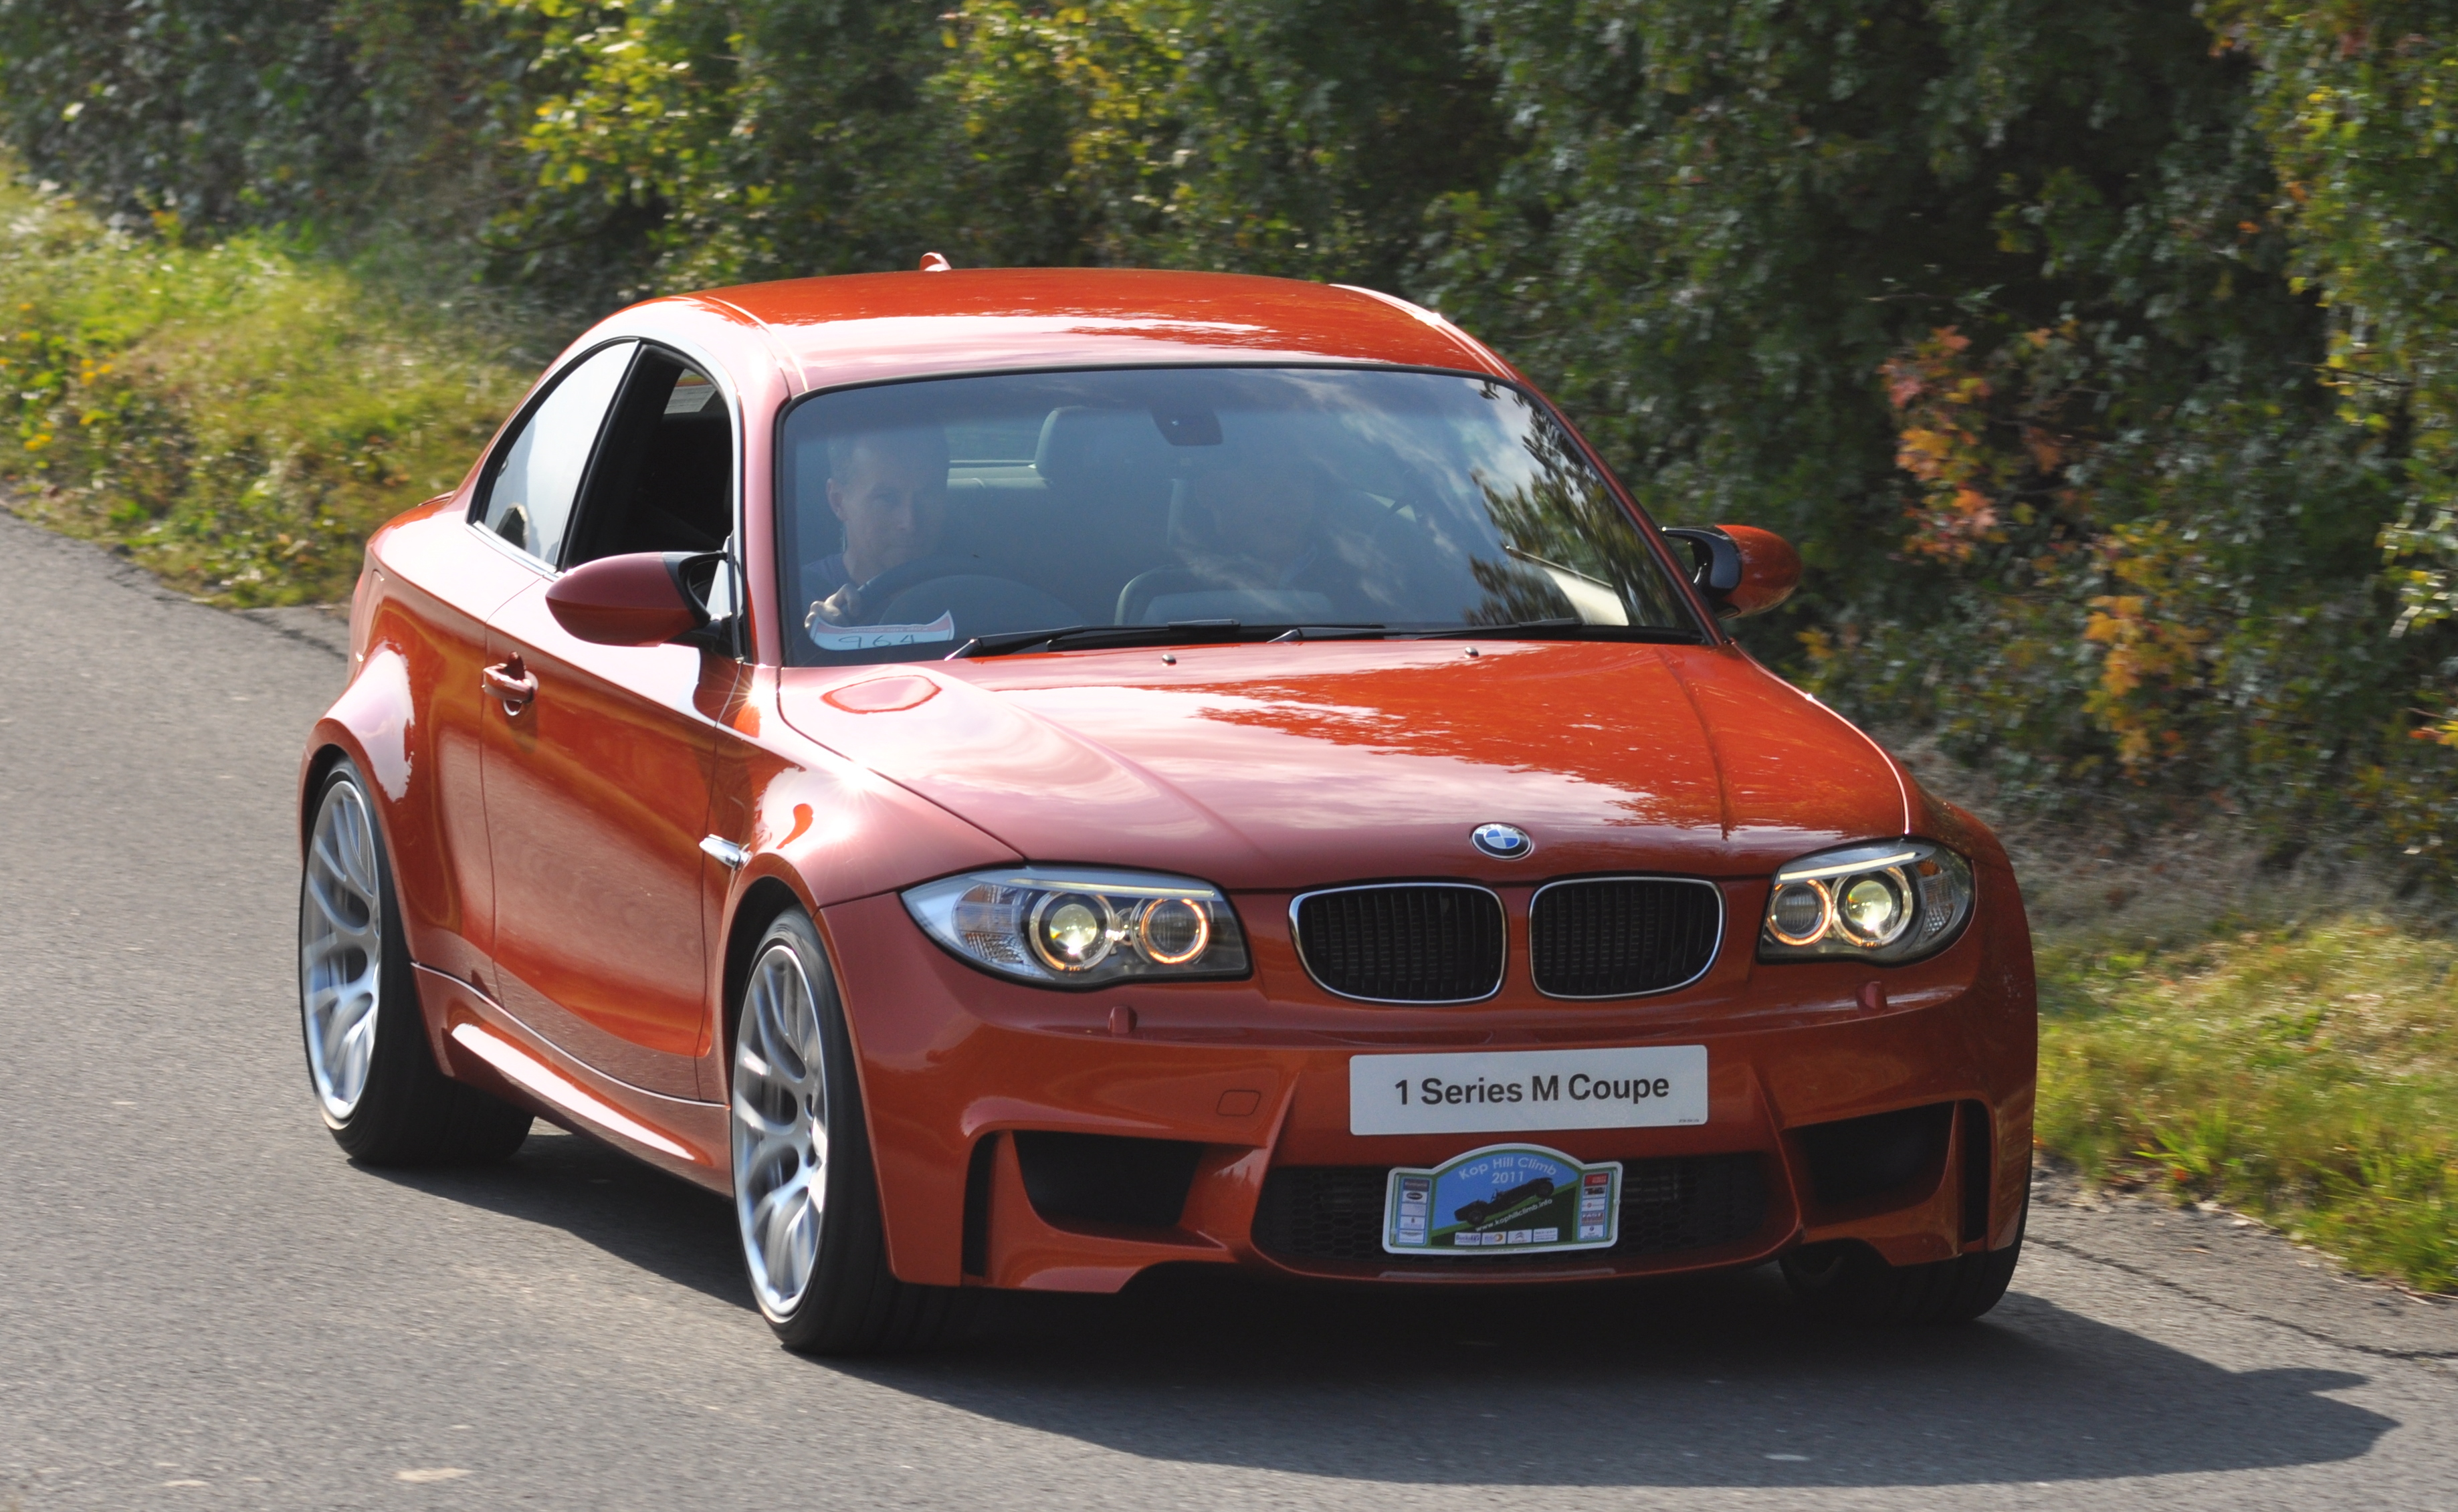 2011 BMW 1 Series M Coupe | Flickr - Photo Sharing!